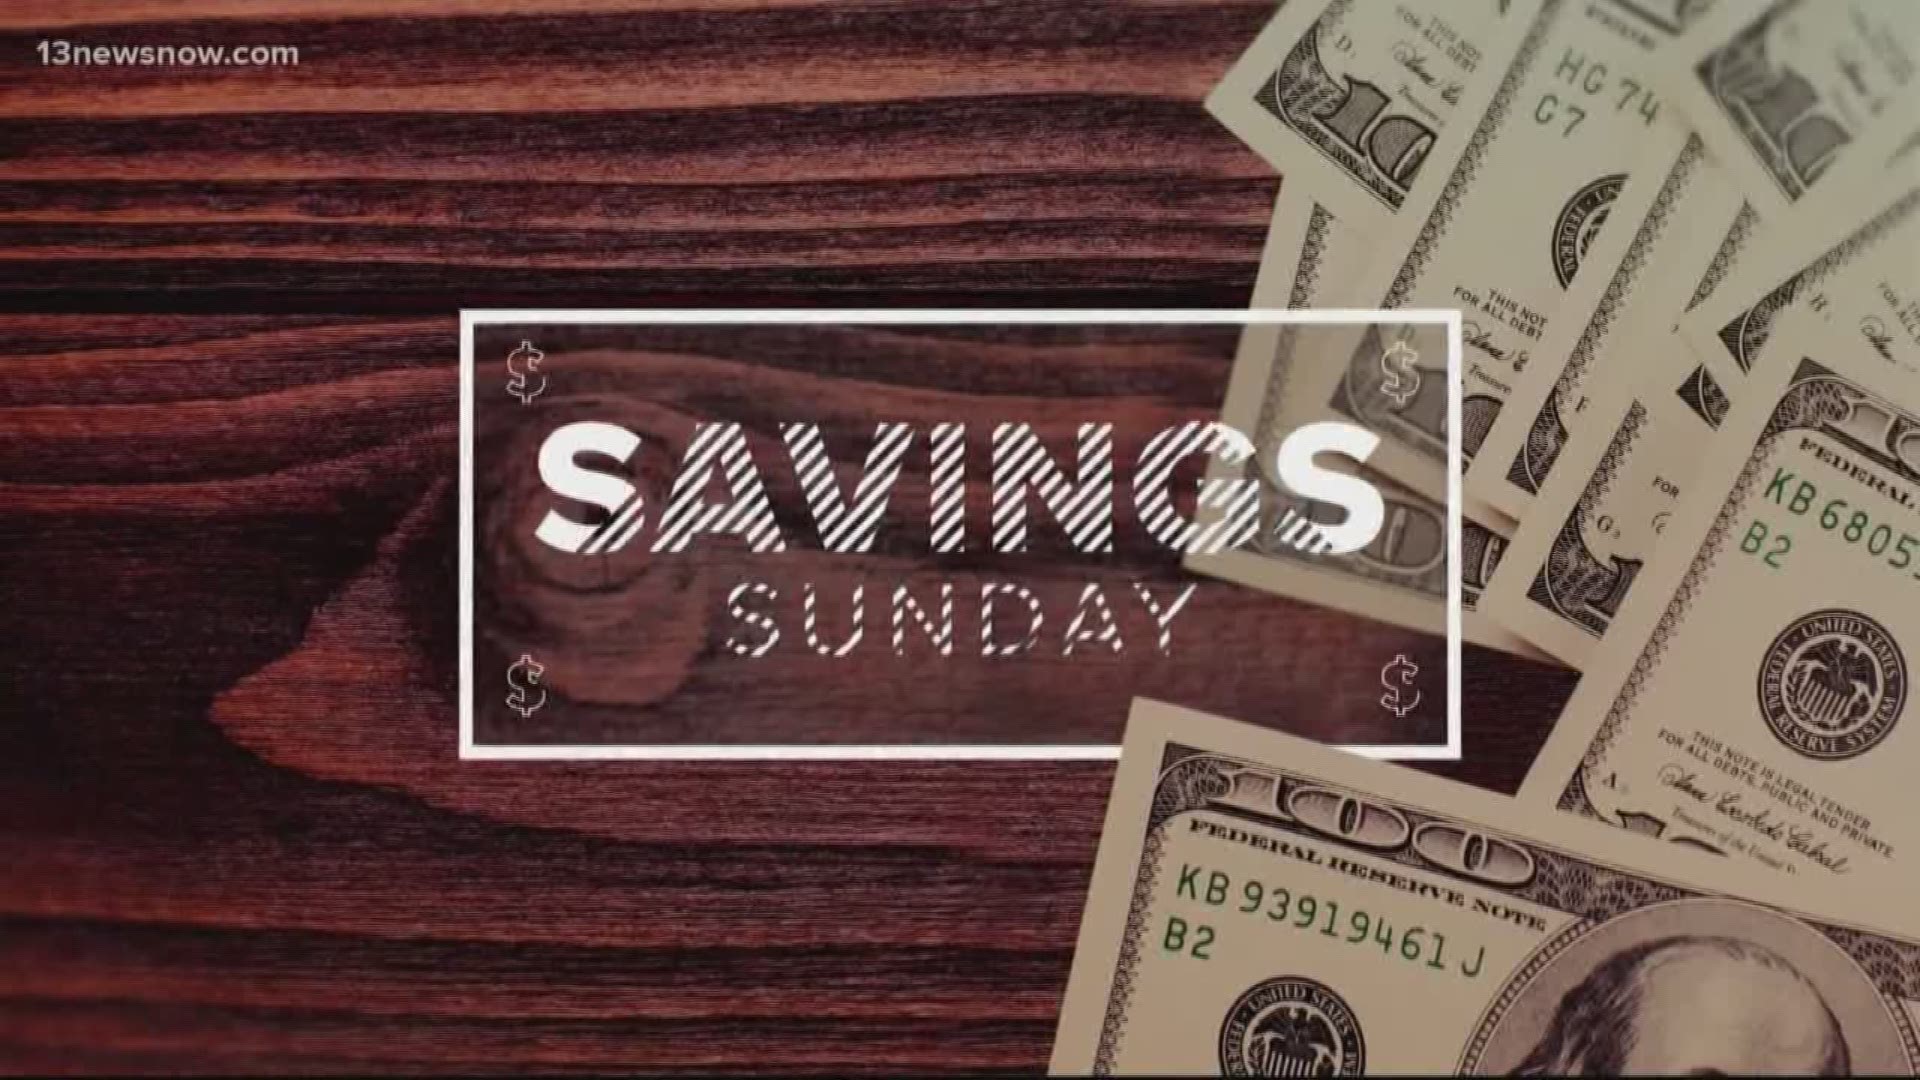 Laura Oliver from www.afrugalchick.com has your big savings for the week of March 8, 2020.